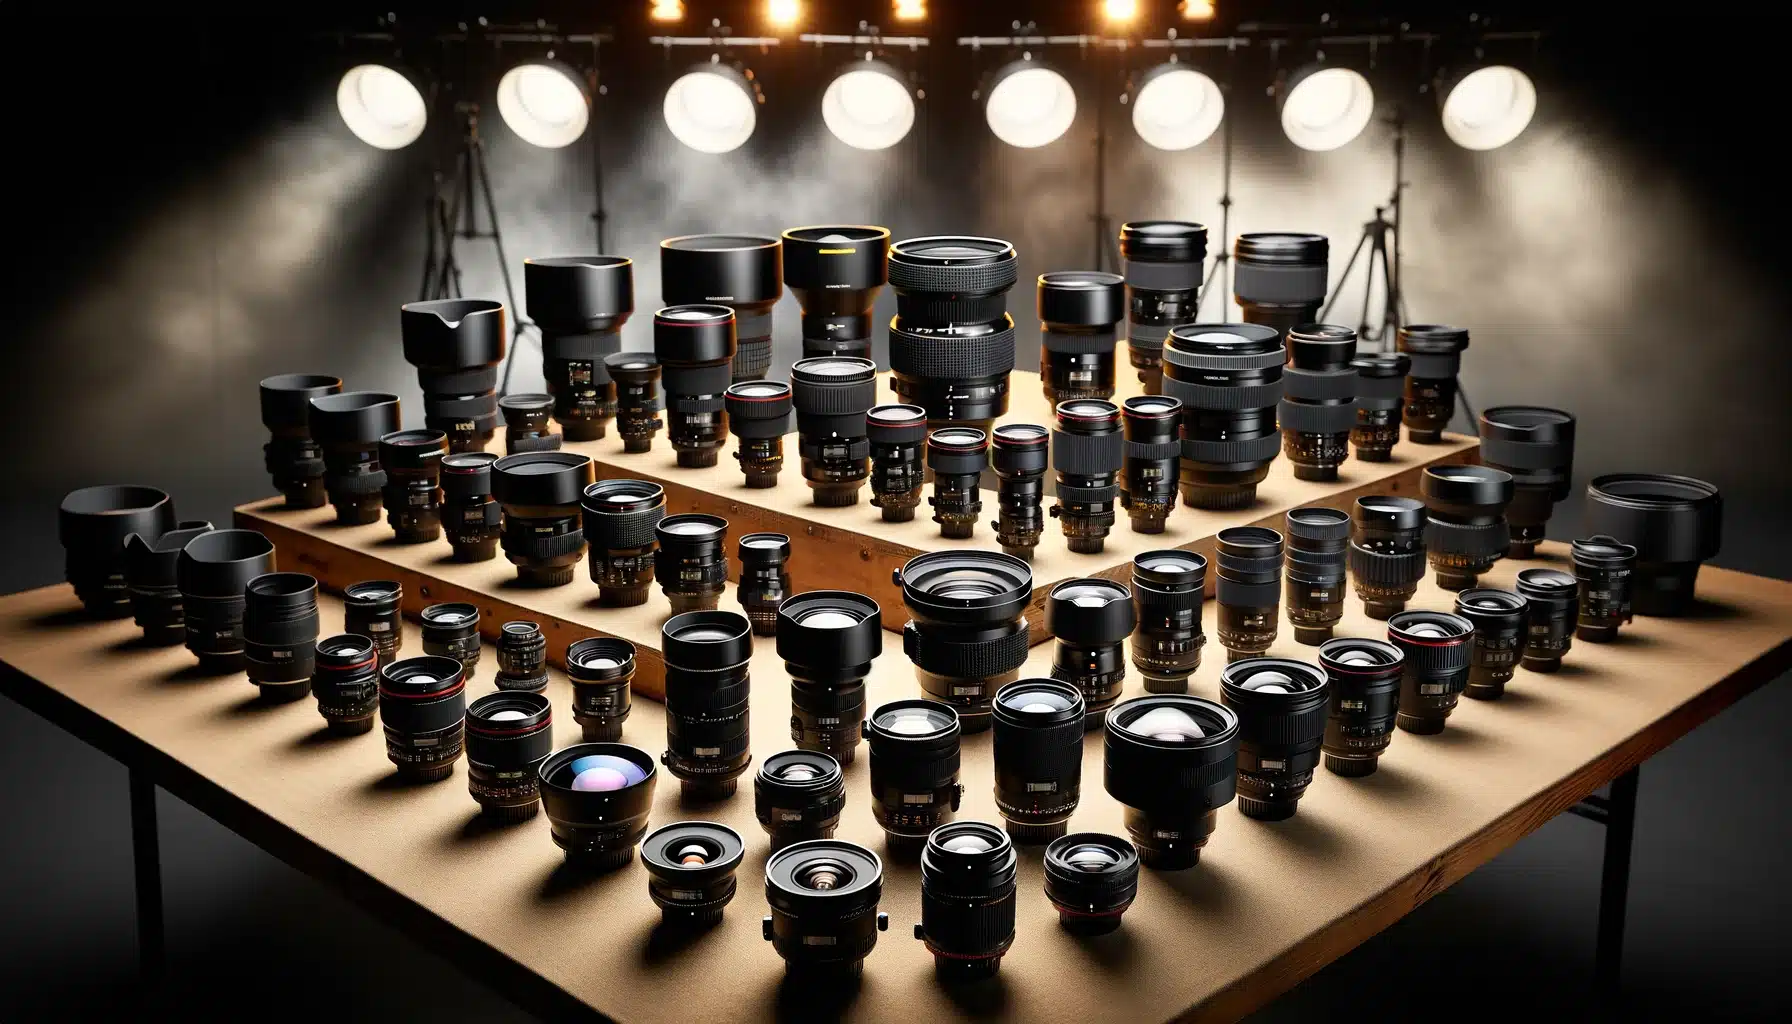 Different Types of Lenses - Optical lens categories